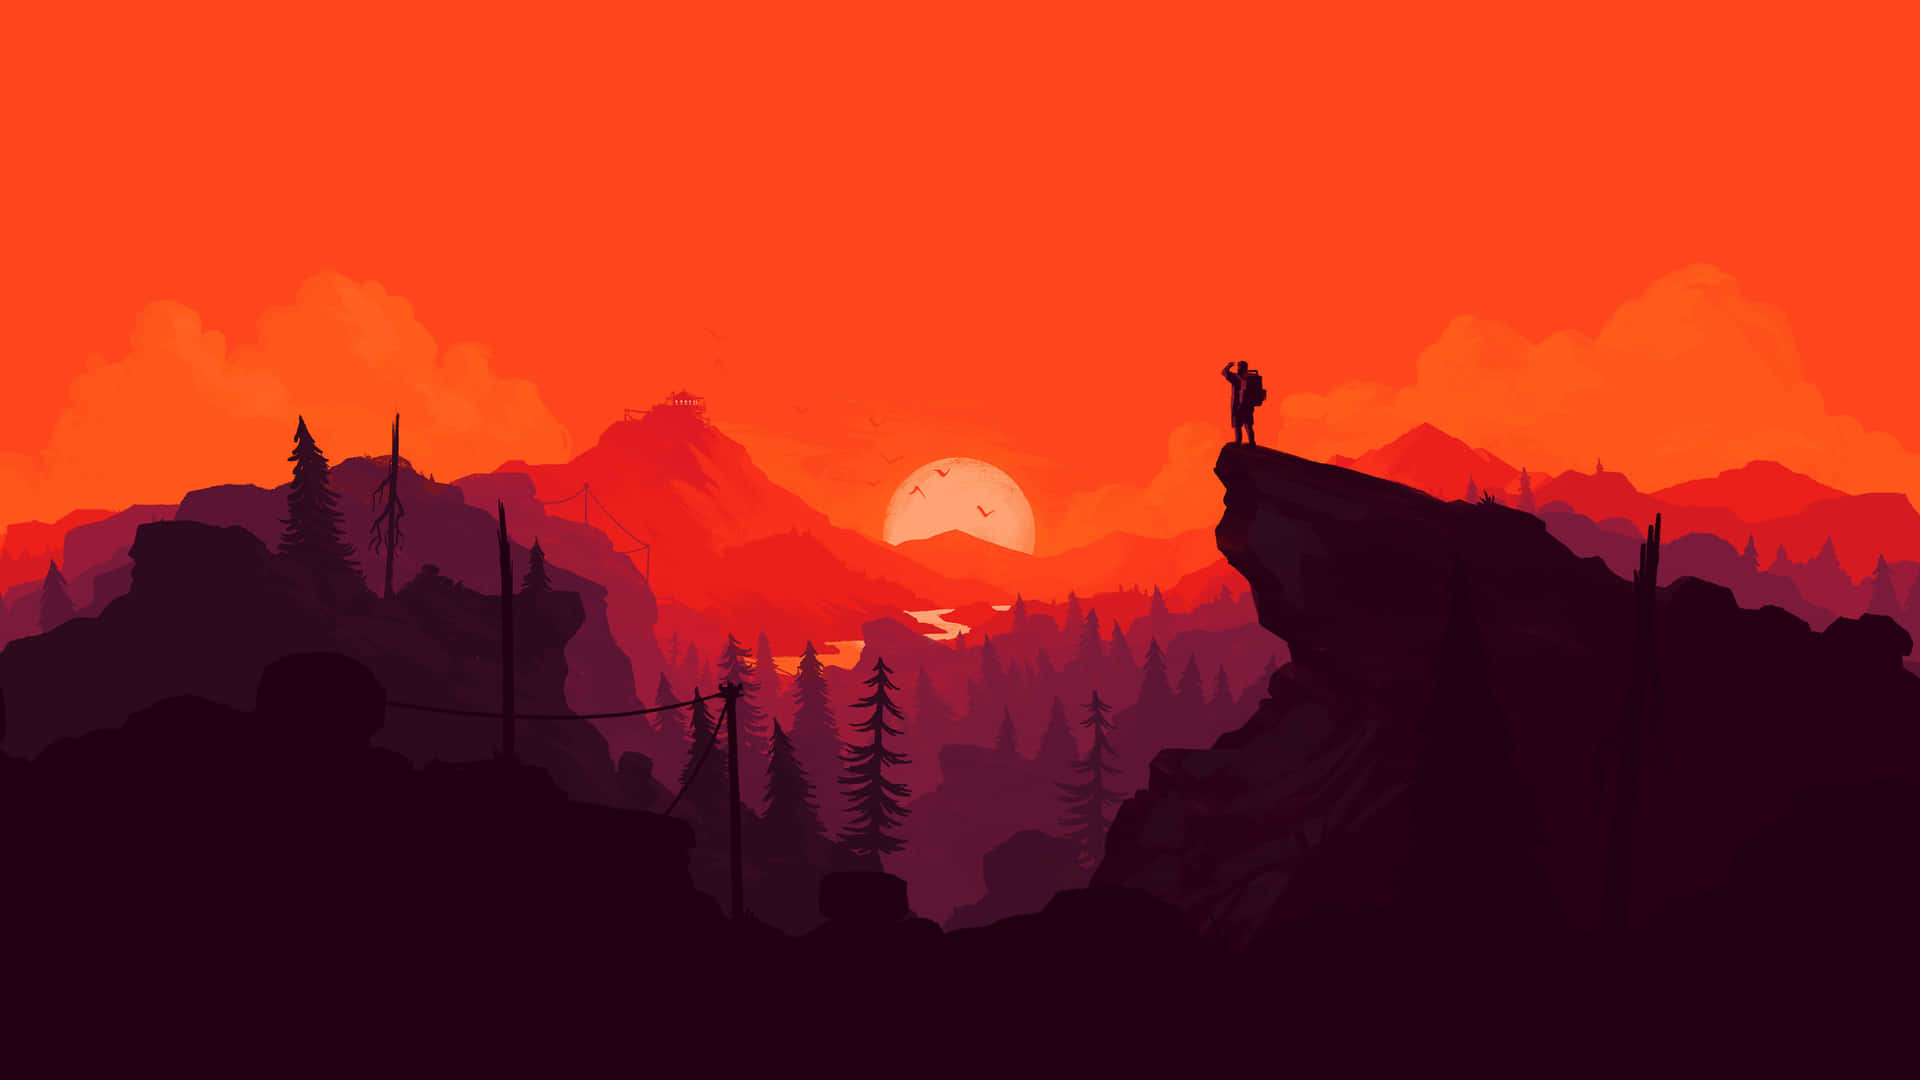 Take a journey in the dazzling environment of Firewatch